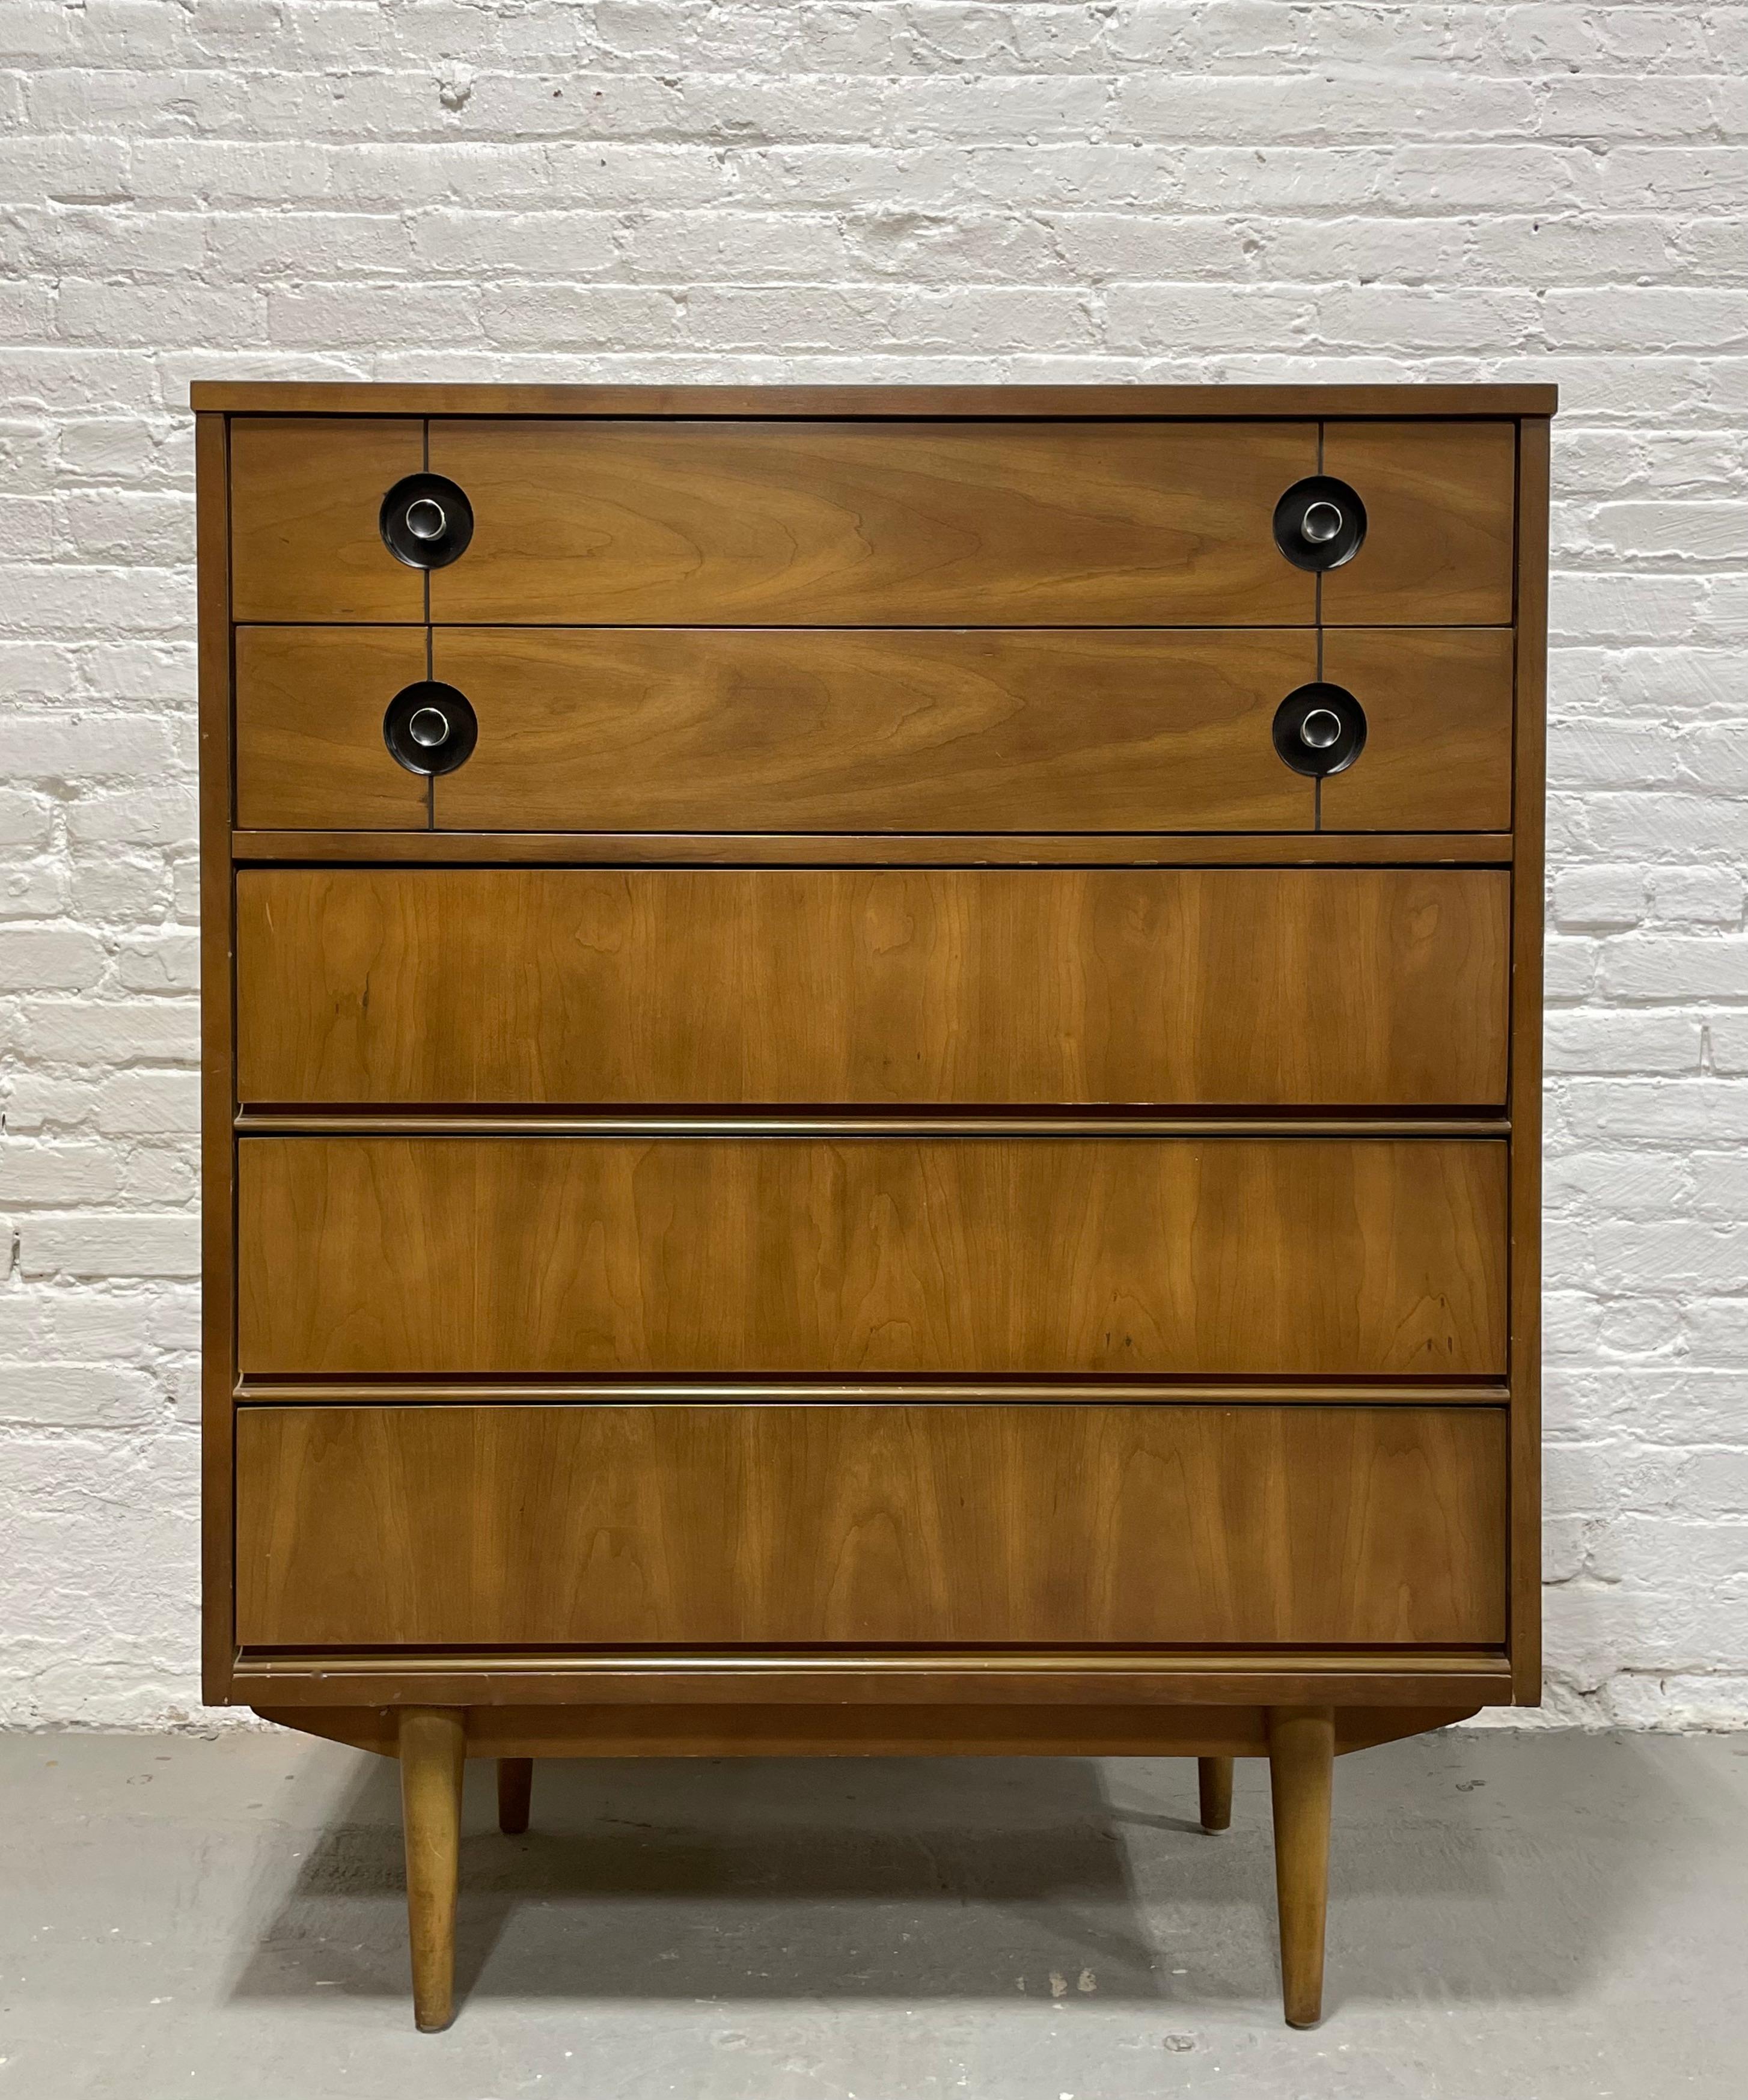 Mid Century Modern Walnut Dresser by Stanley Furniture Co., c. 1960's. This solid dresser offers a ton of storage space over five spacious drawers.  Gorgeous woodgrains throughout with a unique recessed ebonized chrome drawer pull design.